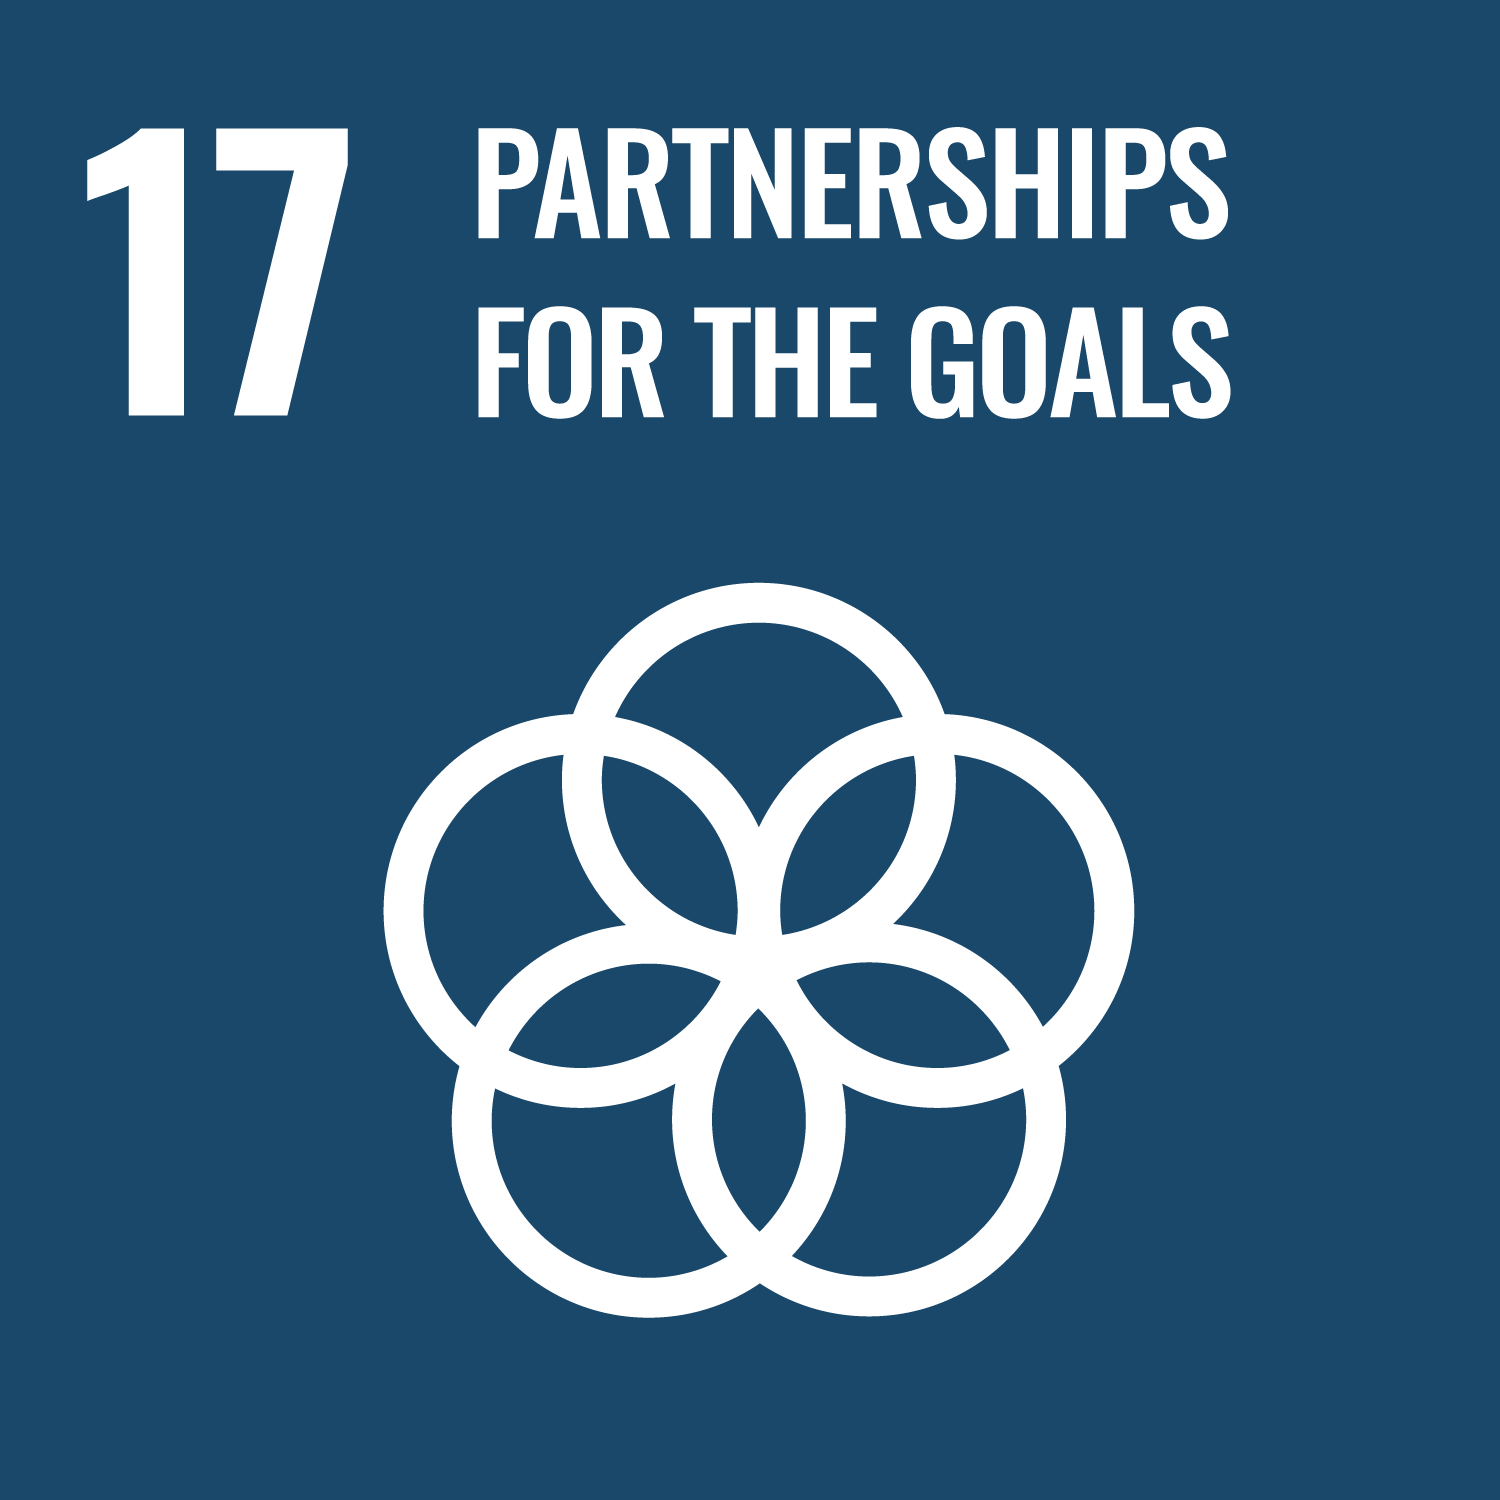 The Nordics and Sustainable Development Goal 17: Partnerships for the goals